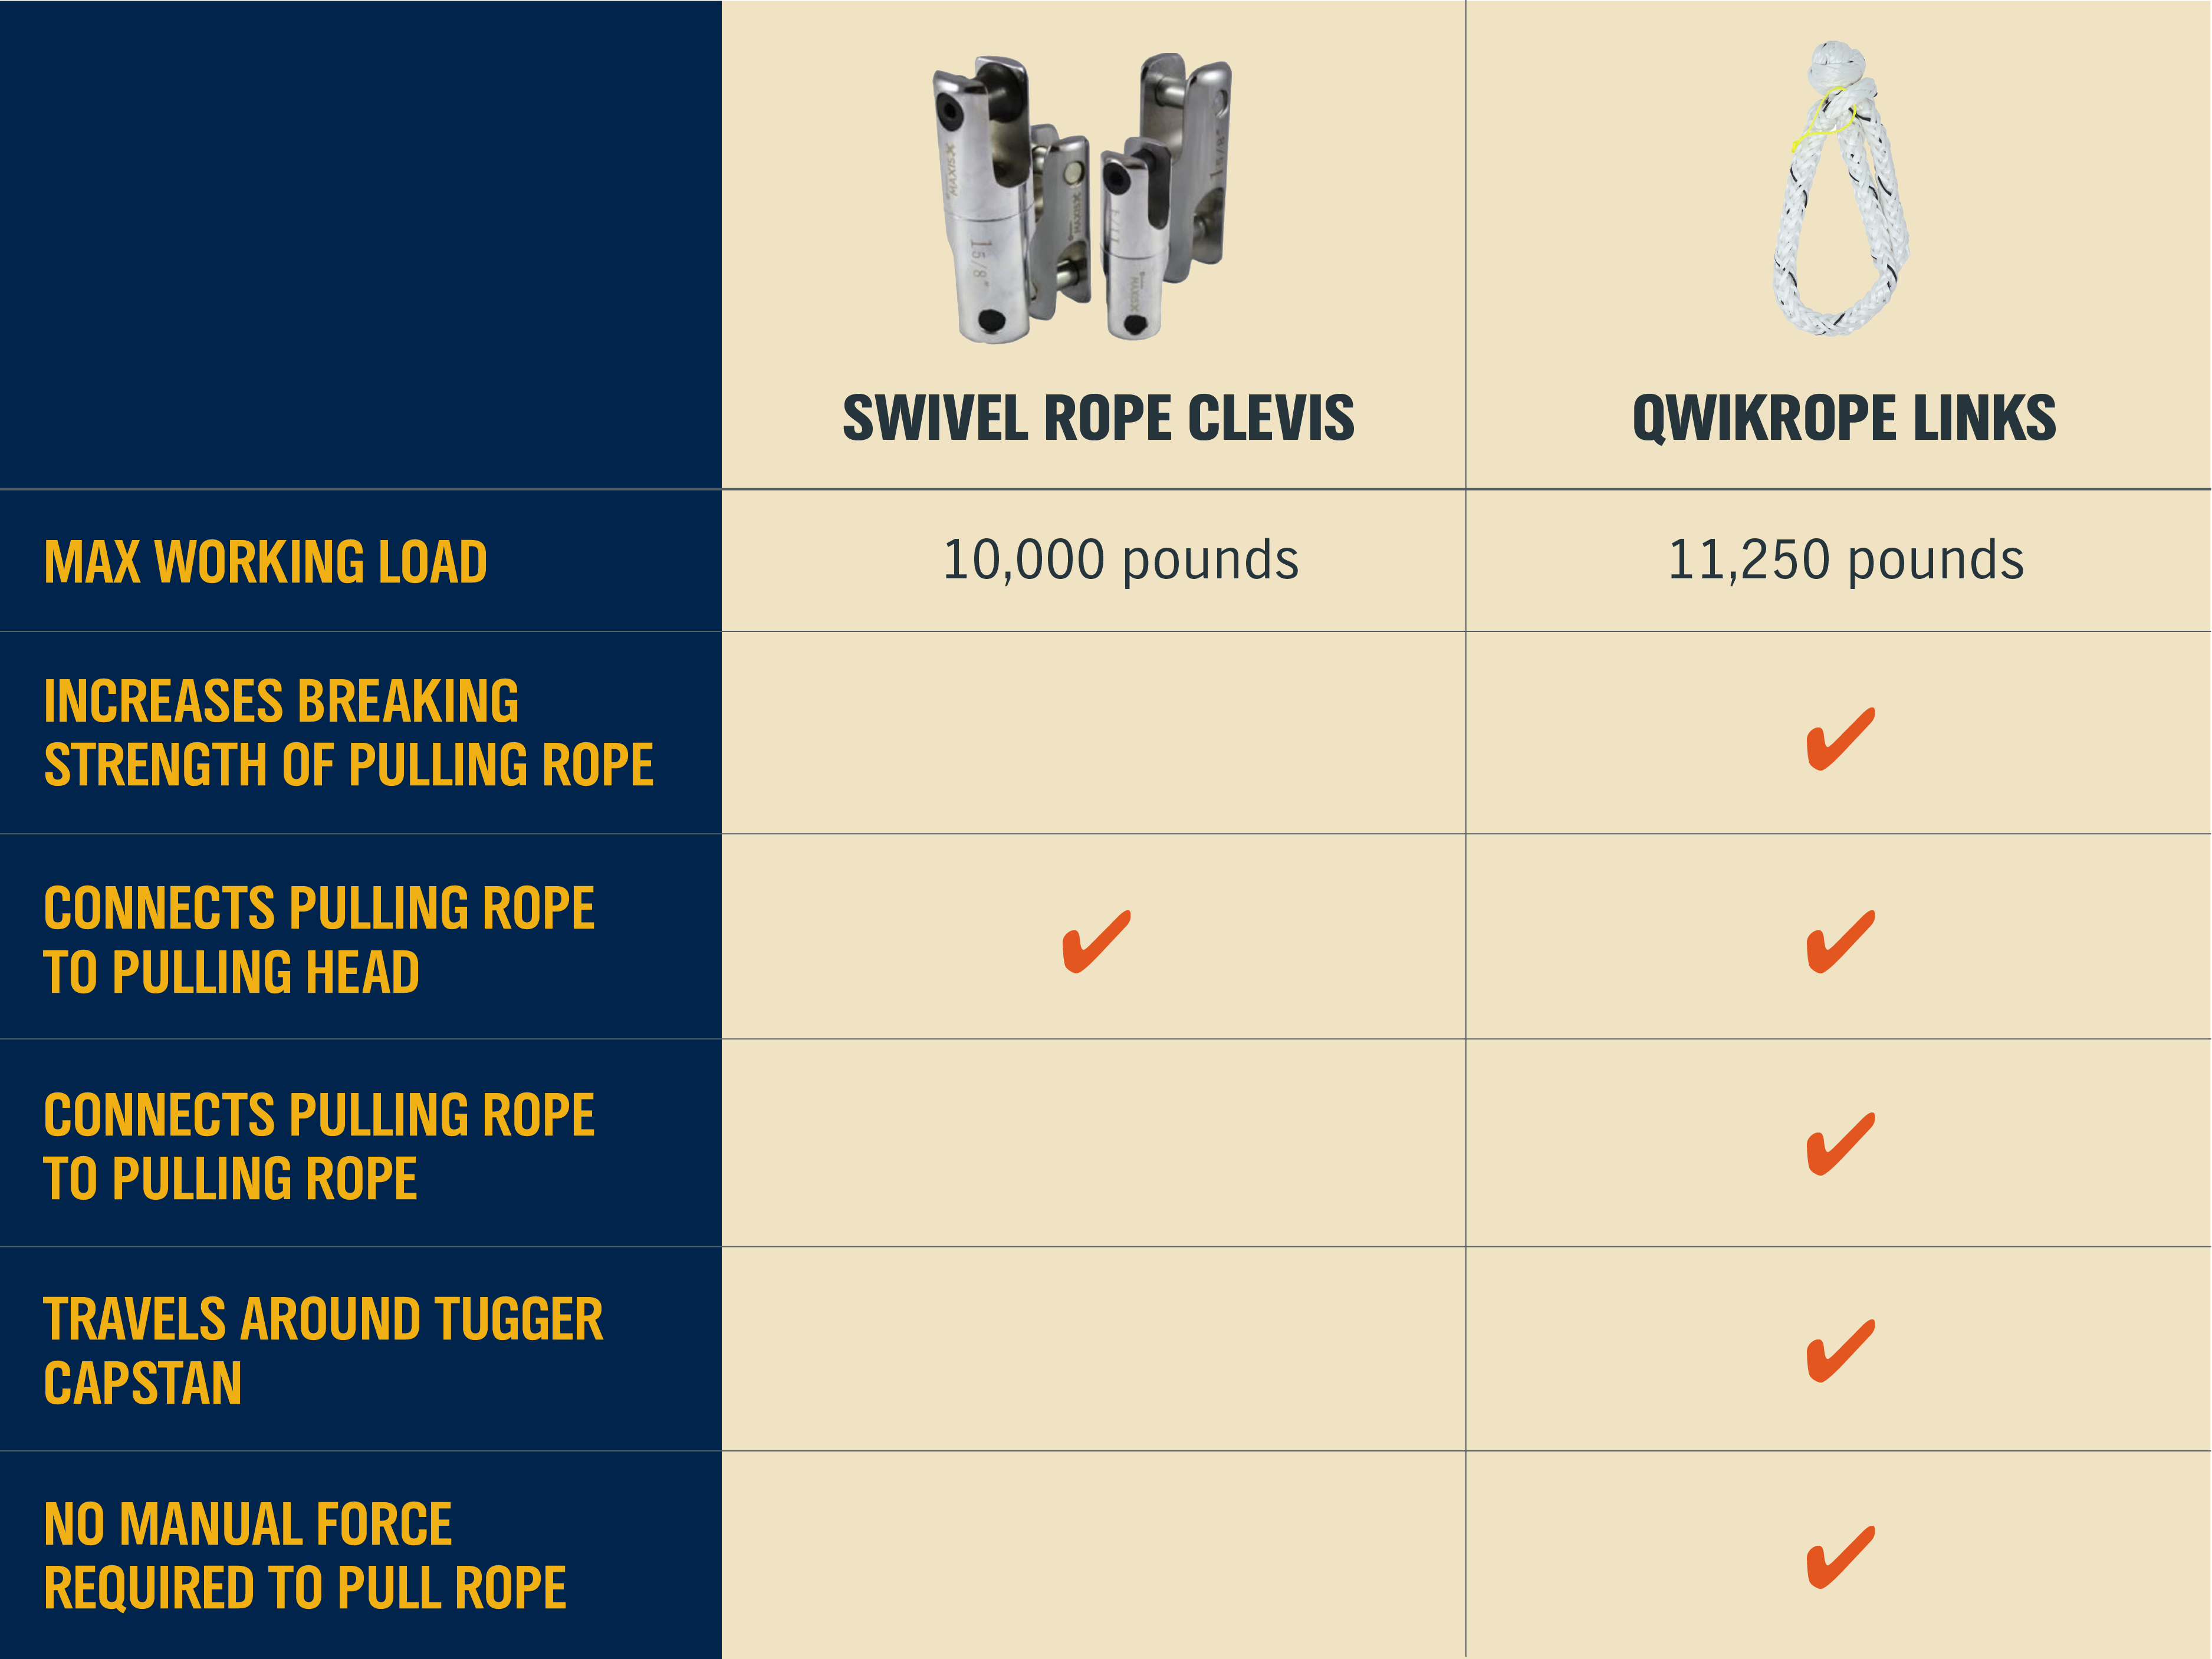 swivel rope clevis comparison southwire qwikrope